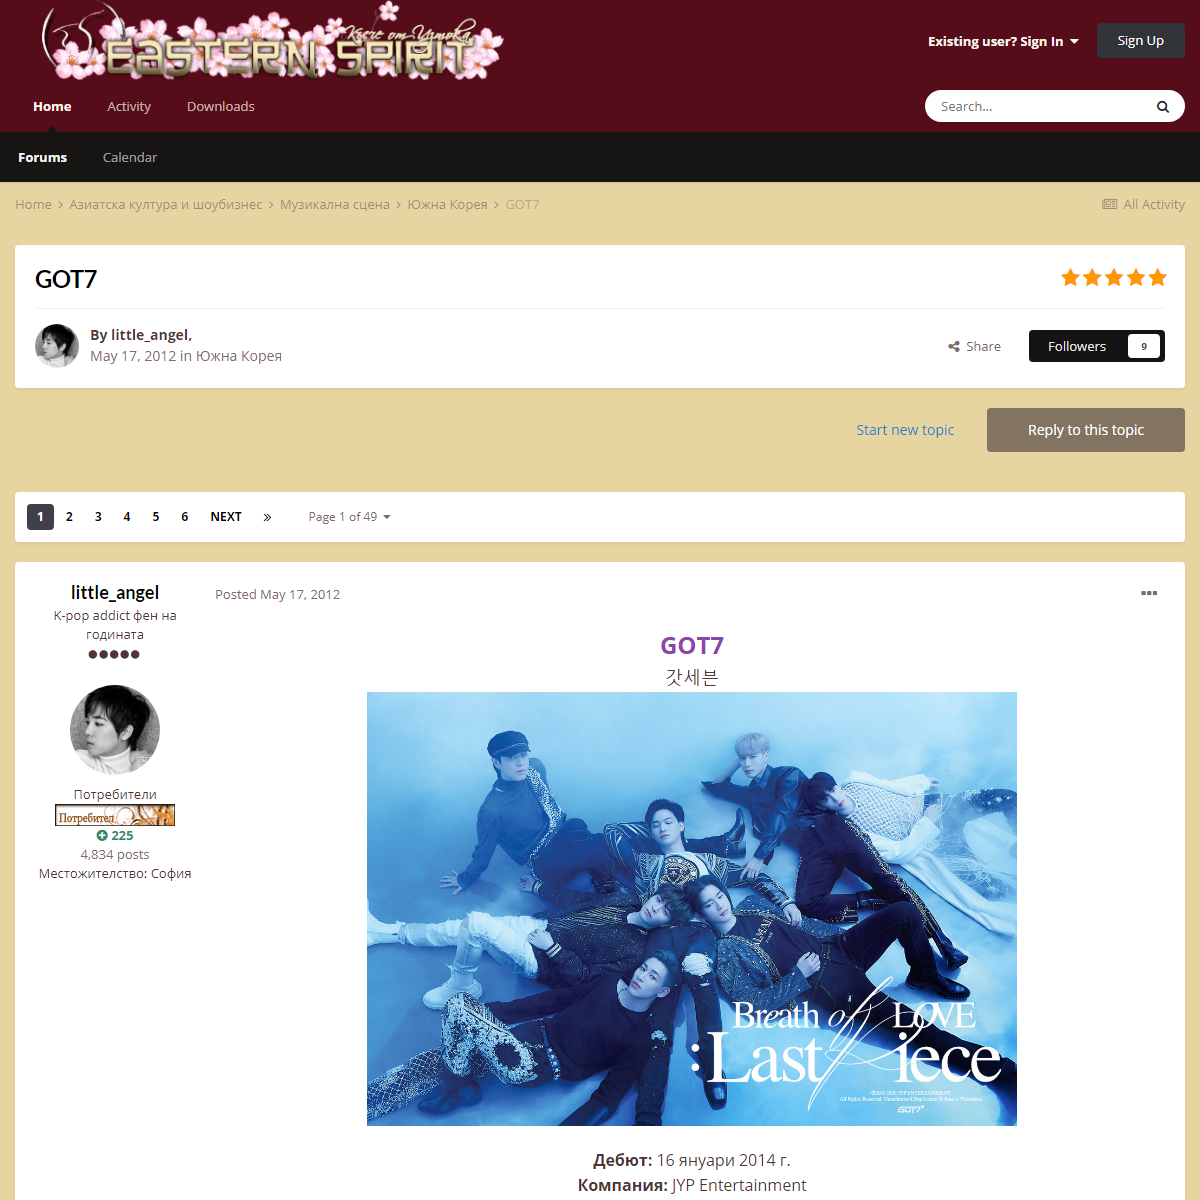 A complete backup of http://www.easternspirit.org/forum/index.php?/topic/7139-got7/